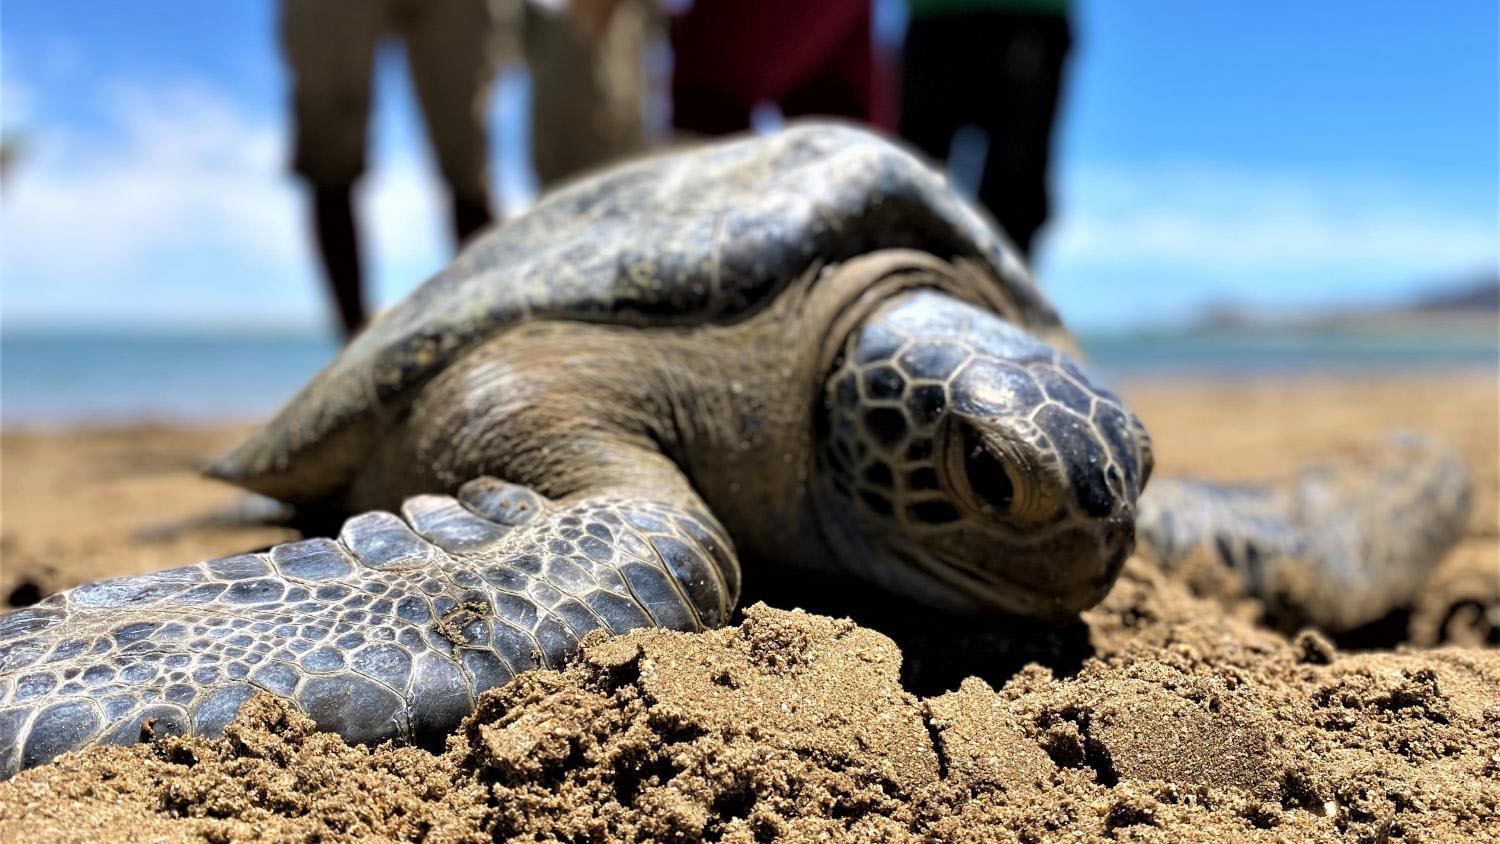 A sea turtle heads back to the ocean after the tortugueros have finished gathering data on it.